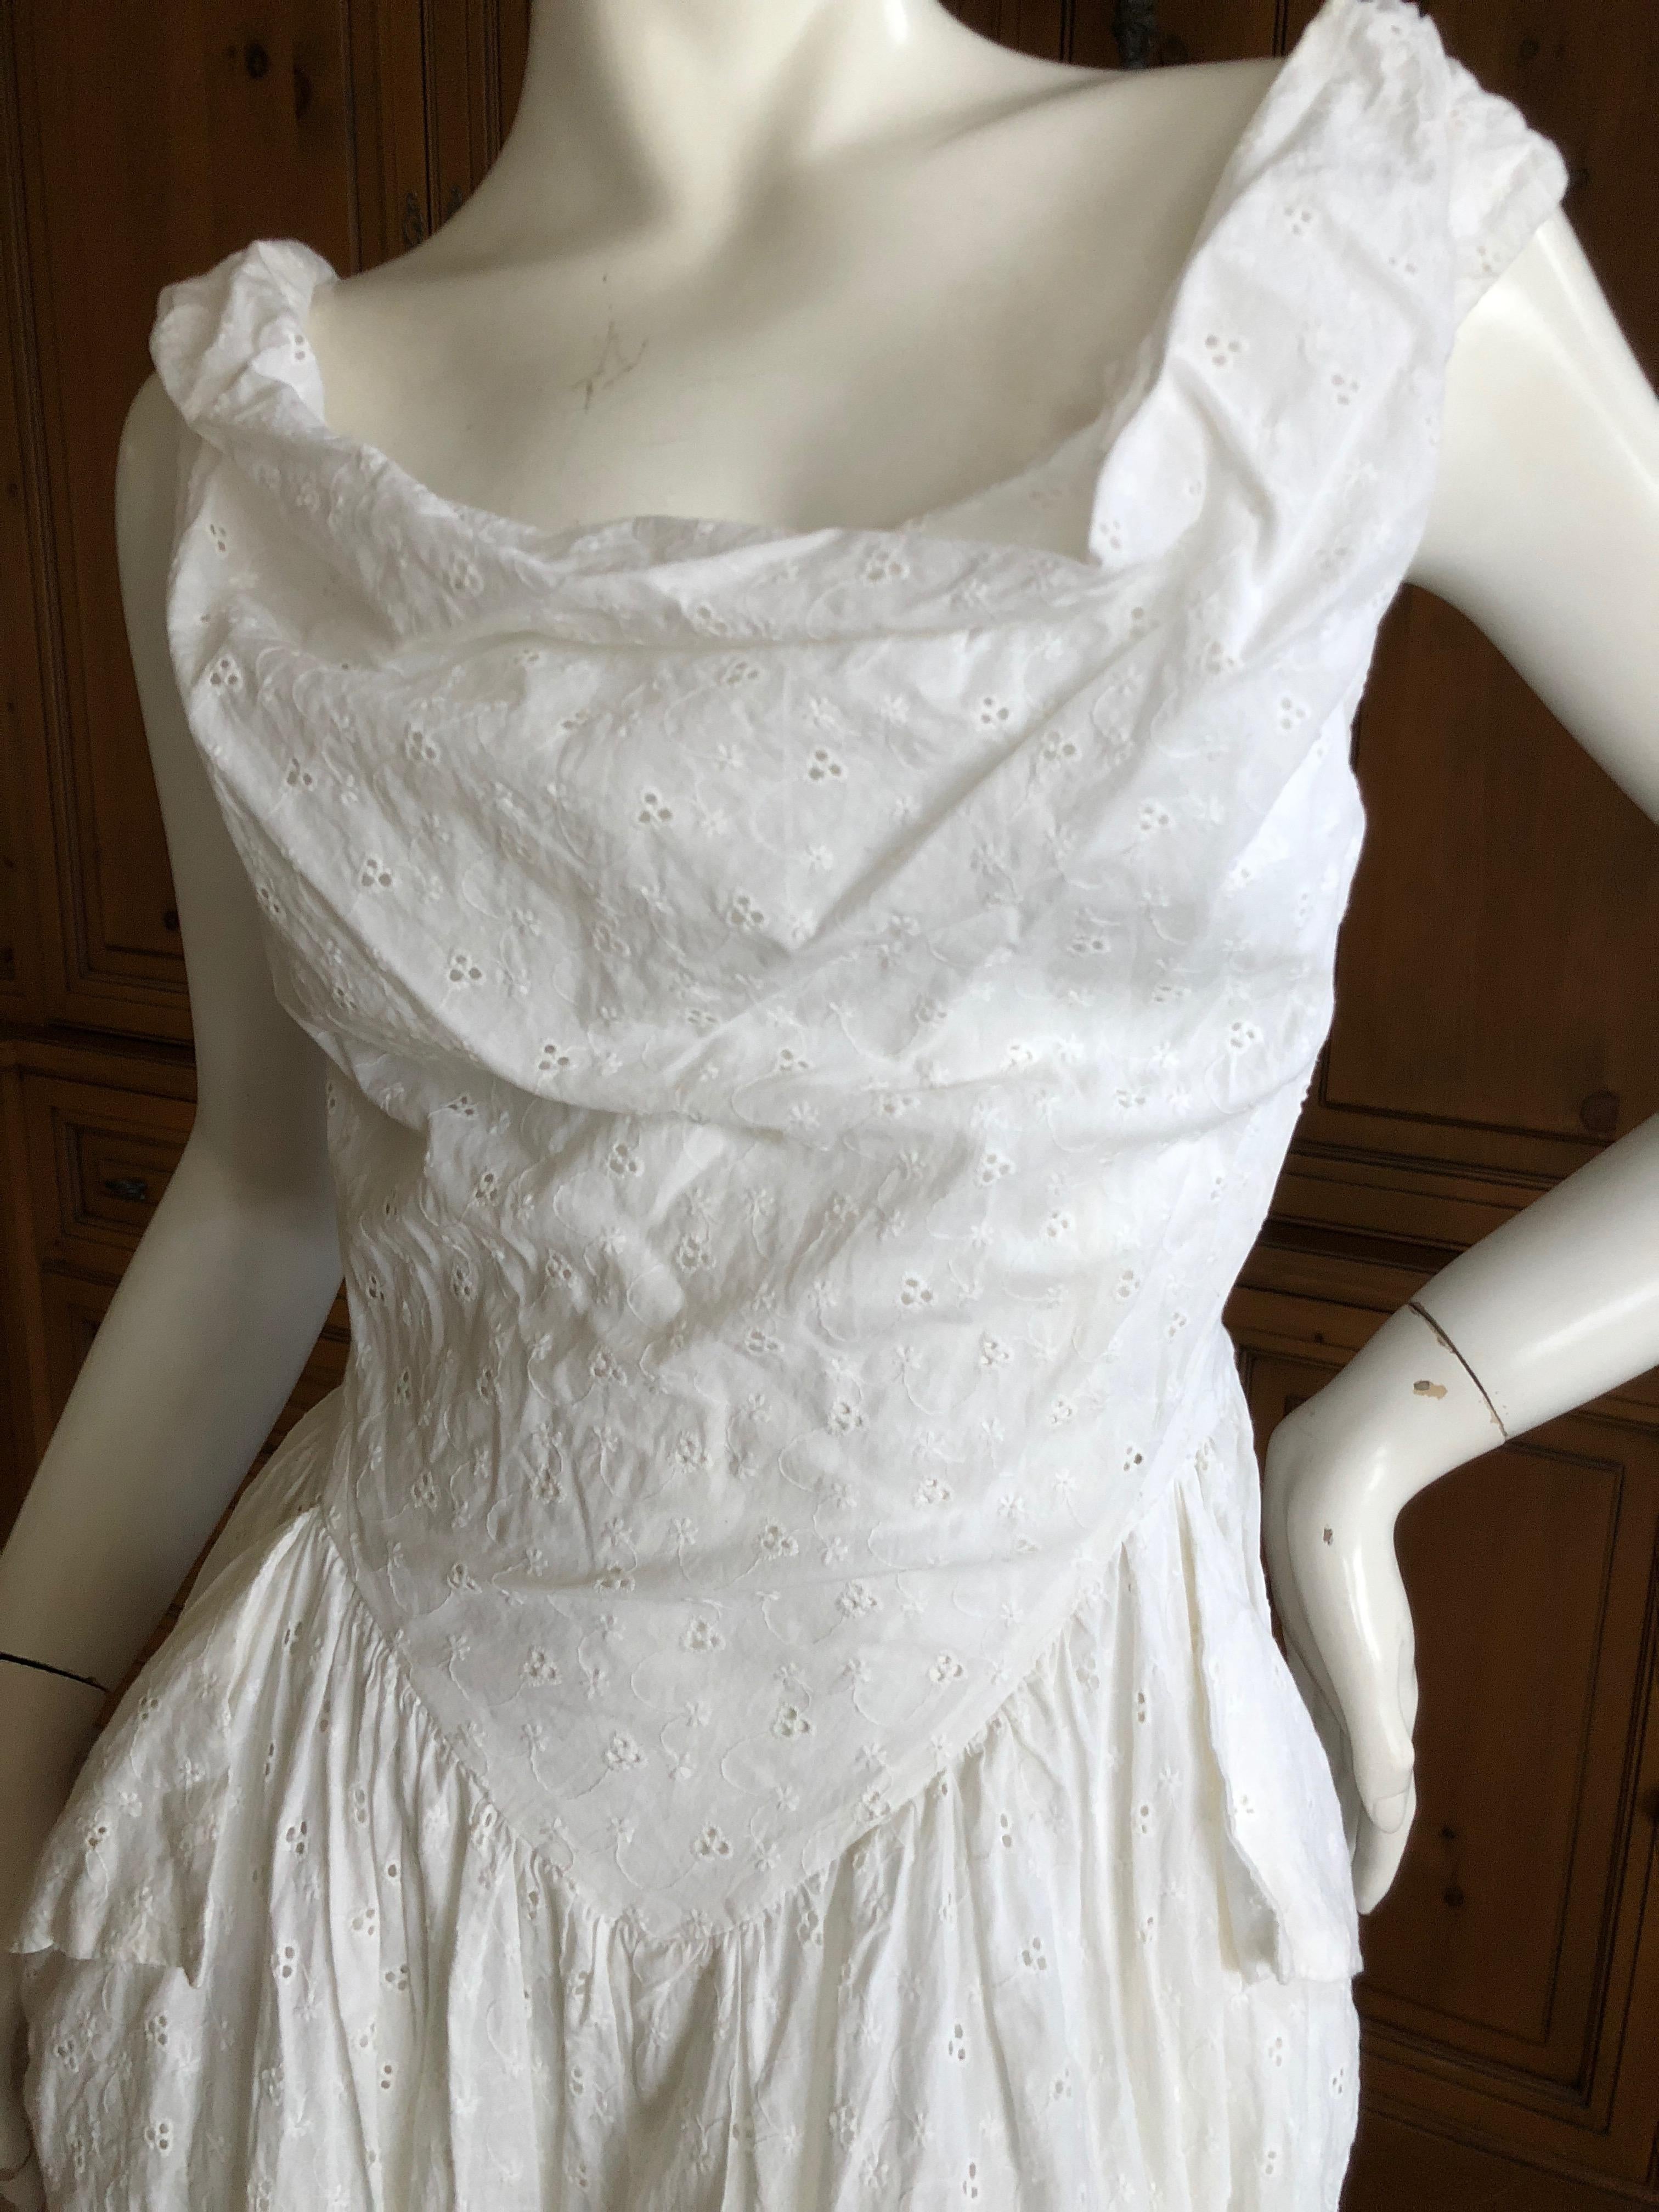 Vivienne Westwood Anglomania White Cotton Eyelet Dress For Sale 1